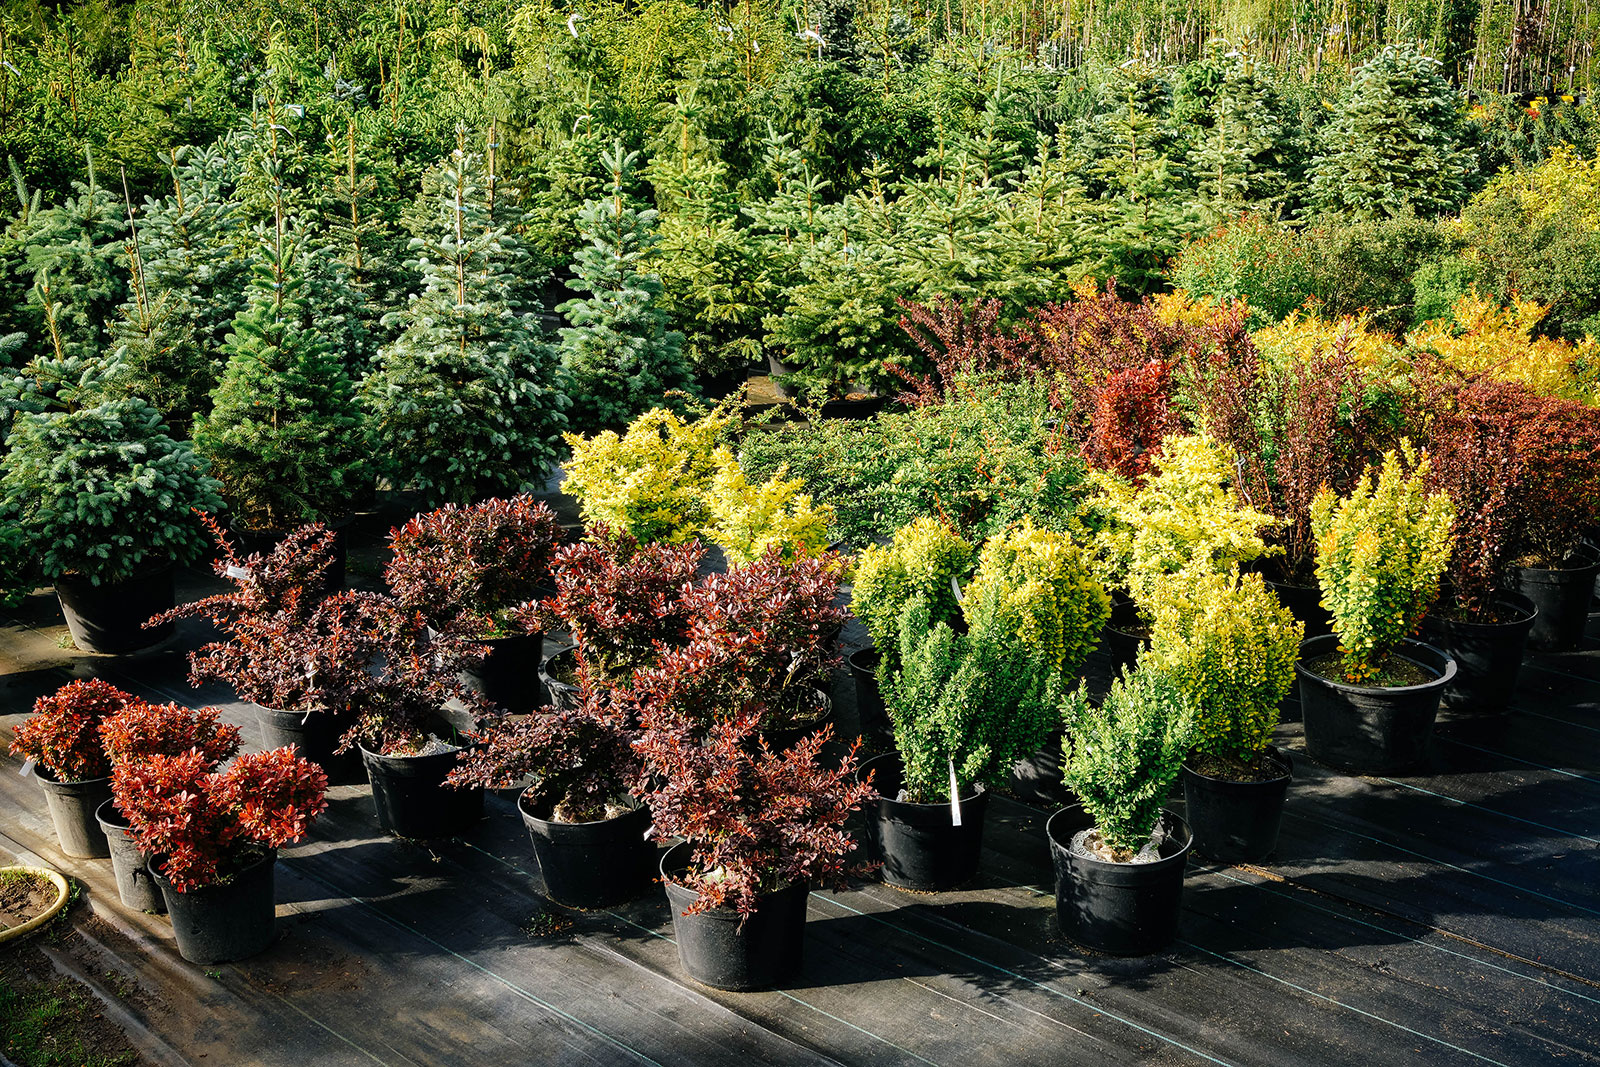 Several varieties of potted shrubs and trees on display in a garden center